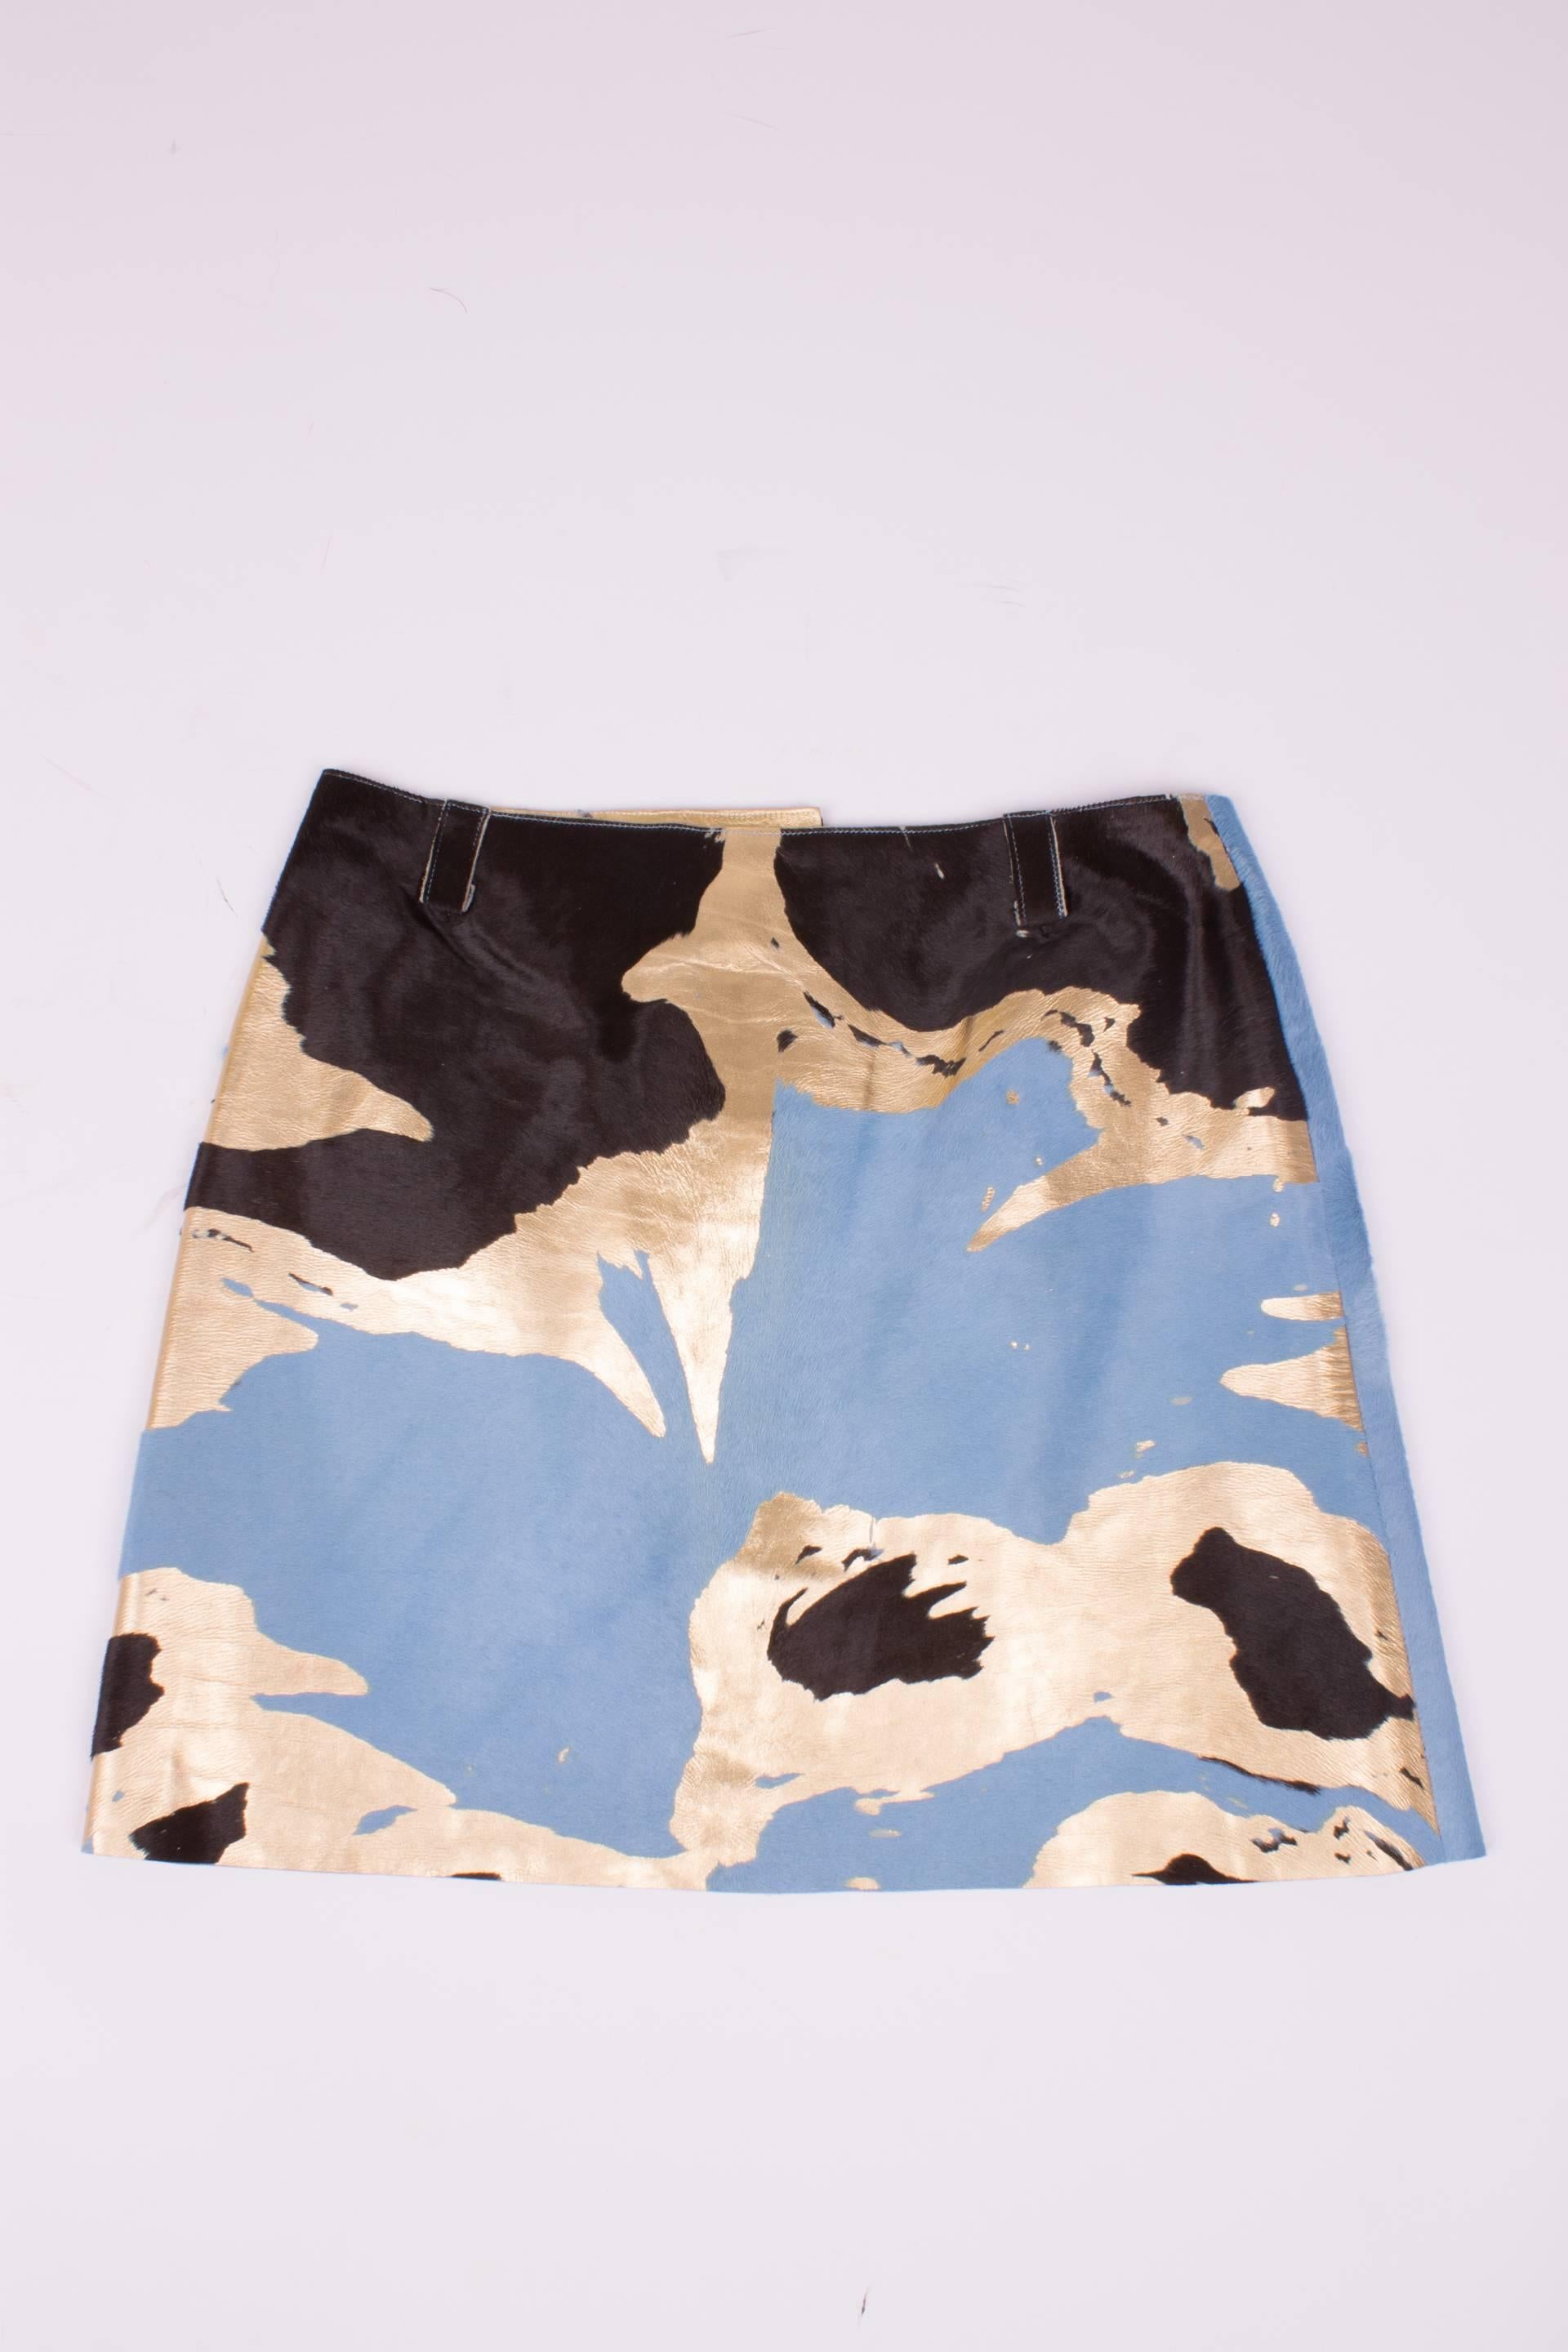 Short skirt by Chanel made of calfskin leather in light blue, dark brown and gold.

This skirt has three button closure, these buttons are square and matte golden. On the outside the calfshair shows in the light blue and dark brown parts. The golden